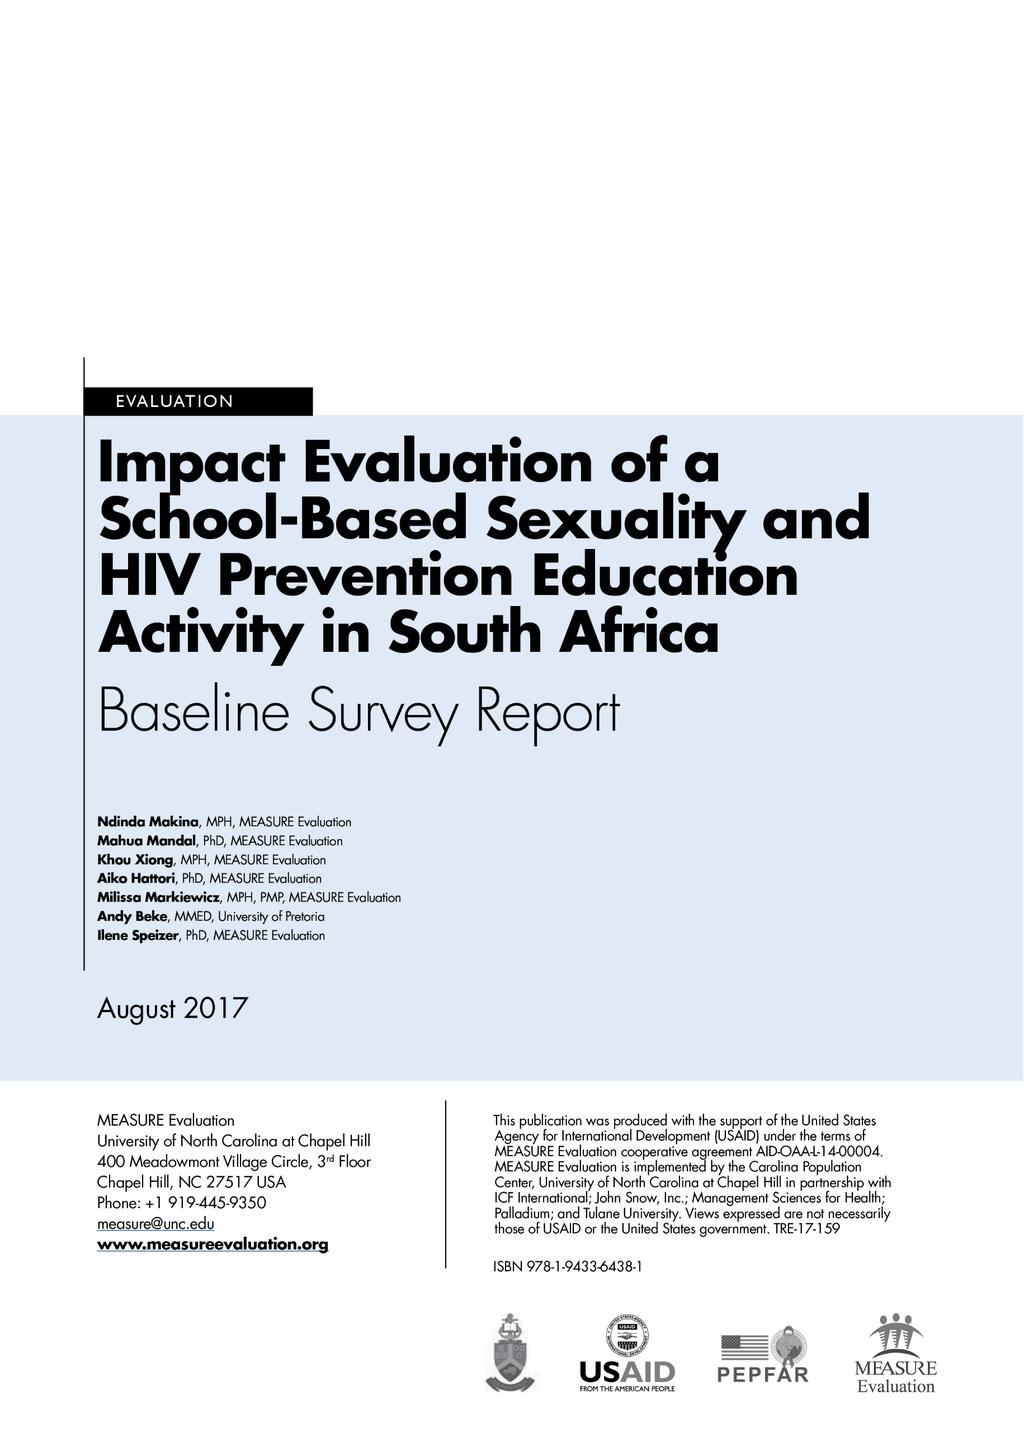 Baseline Report: Impact Evaluation of a